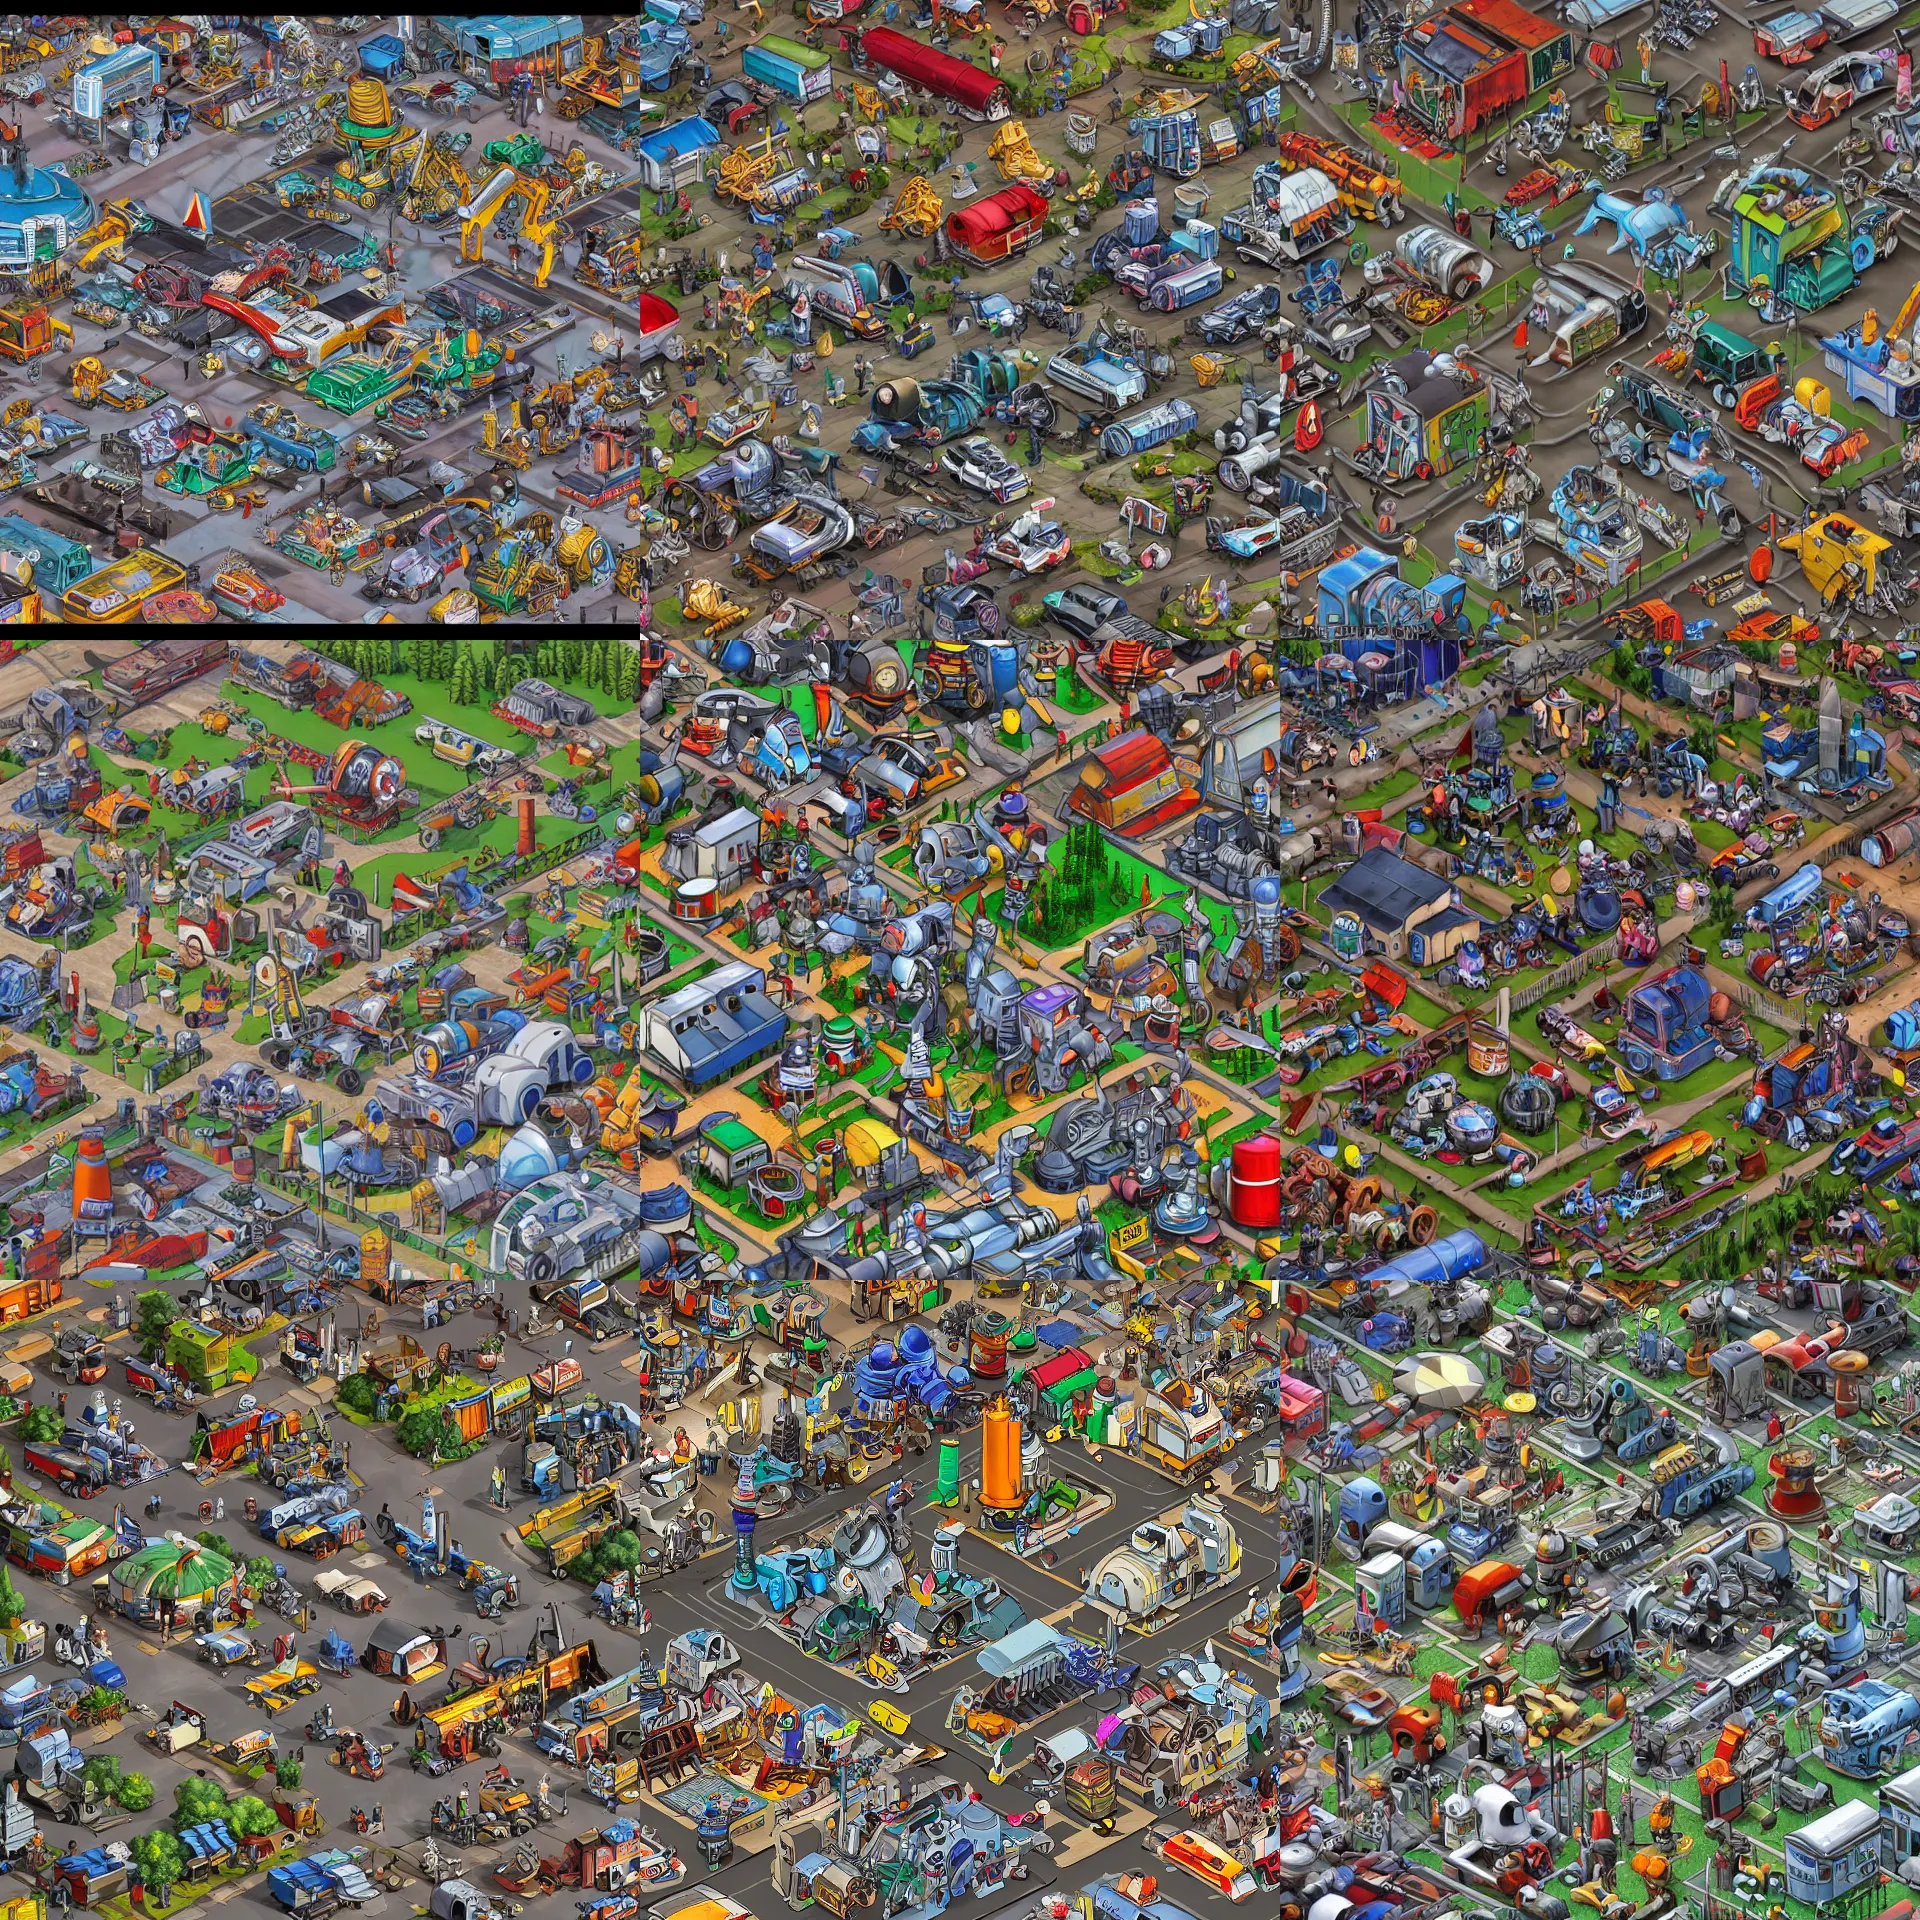 Prompt: close up, detailed, isometric view of a junk yard full of robots and robot parts, from a lucasarts point and click 2 d graphic adventure game, art inspired by thomas kinkade